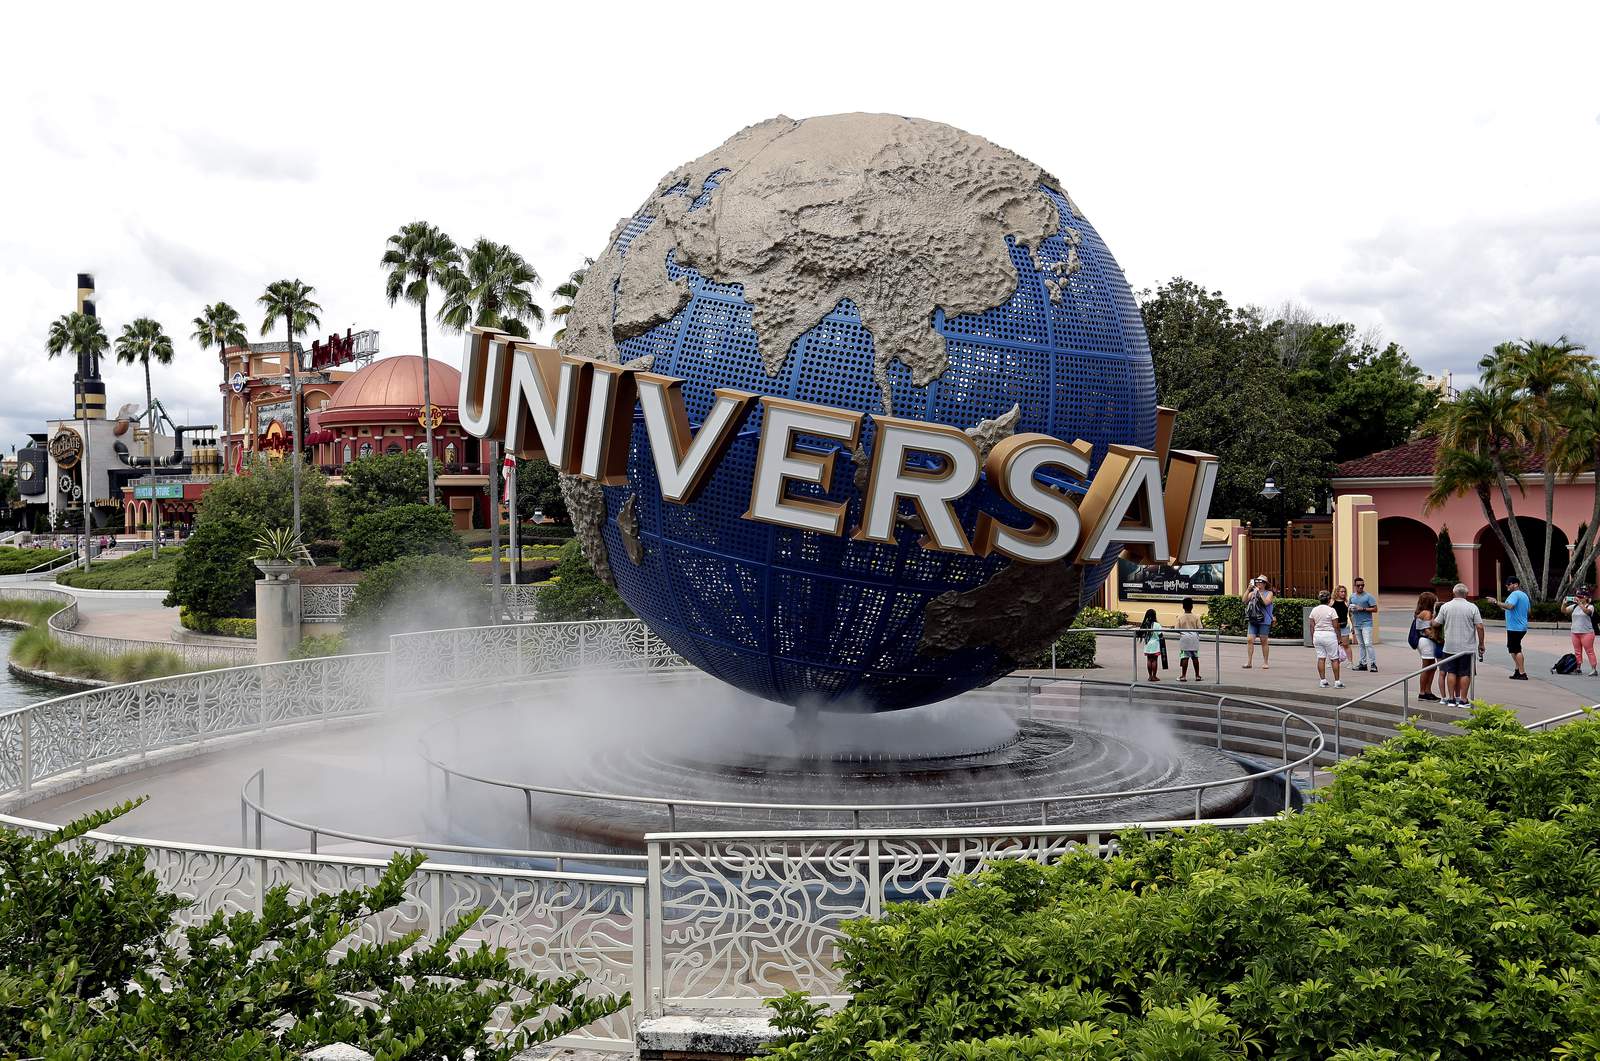 Report: Boy injured on thrill water ride at Universal